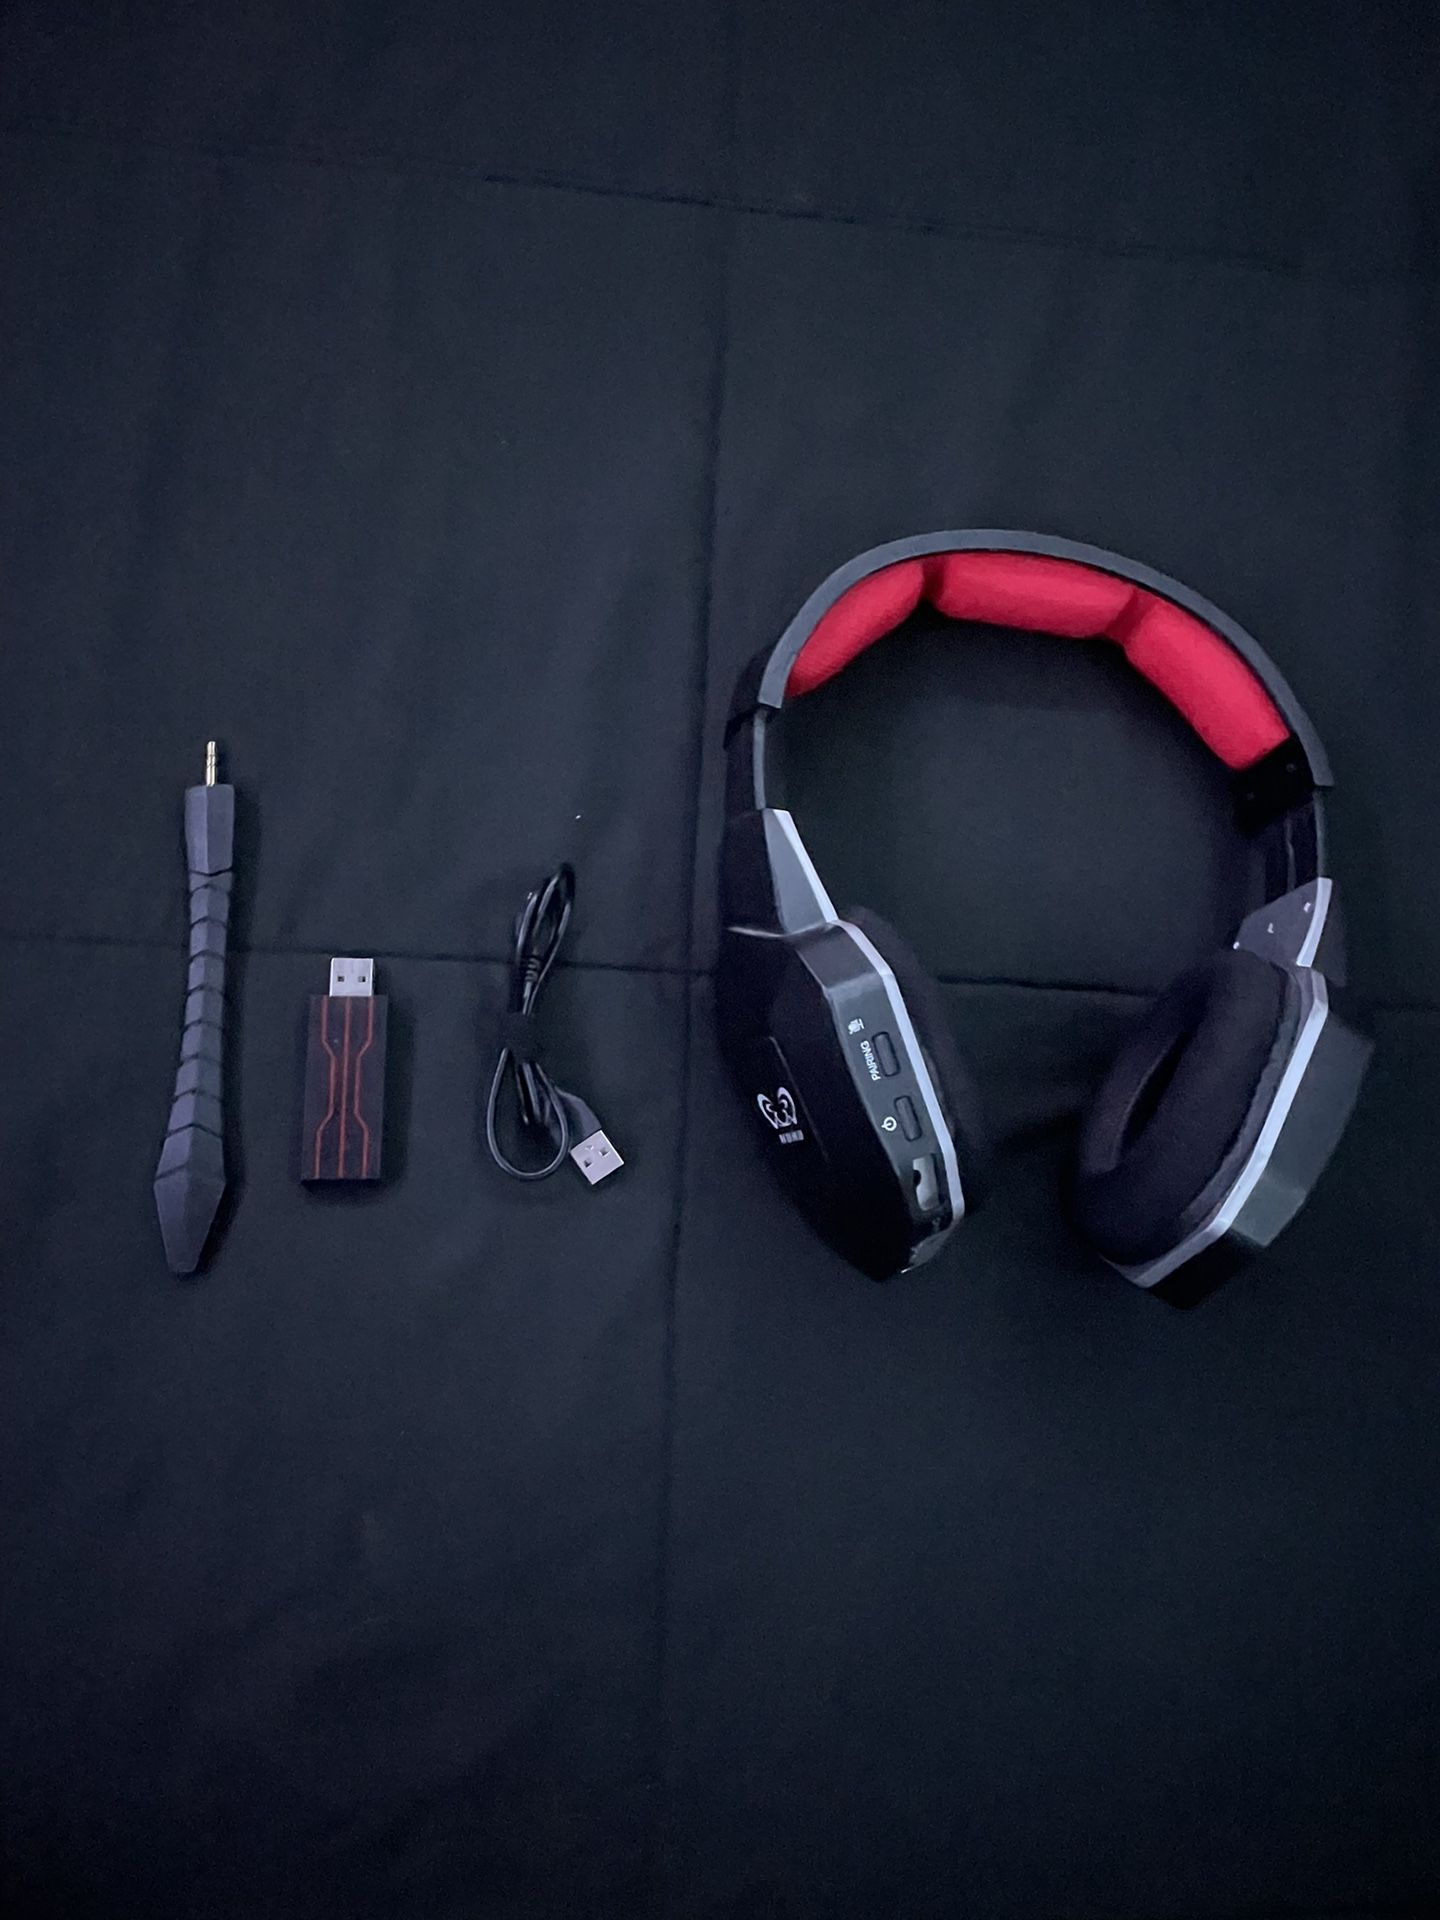 Wireless Headset (red And Black)